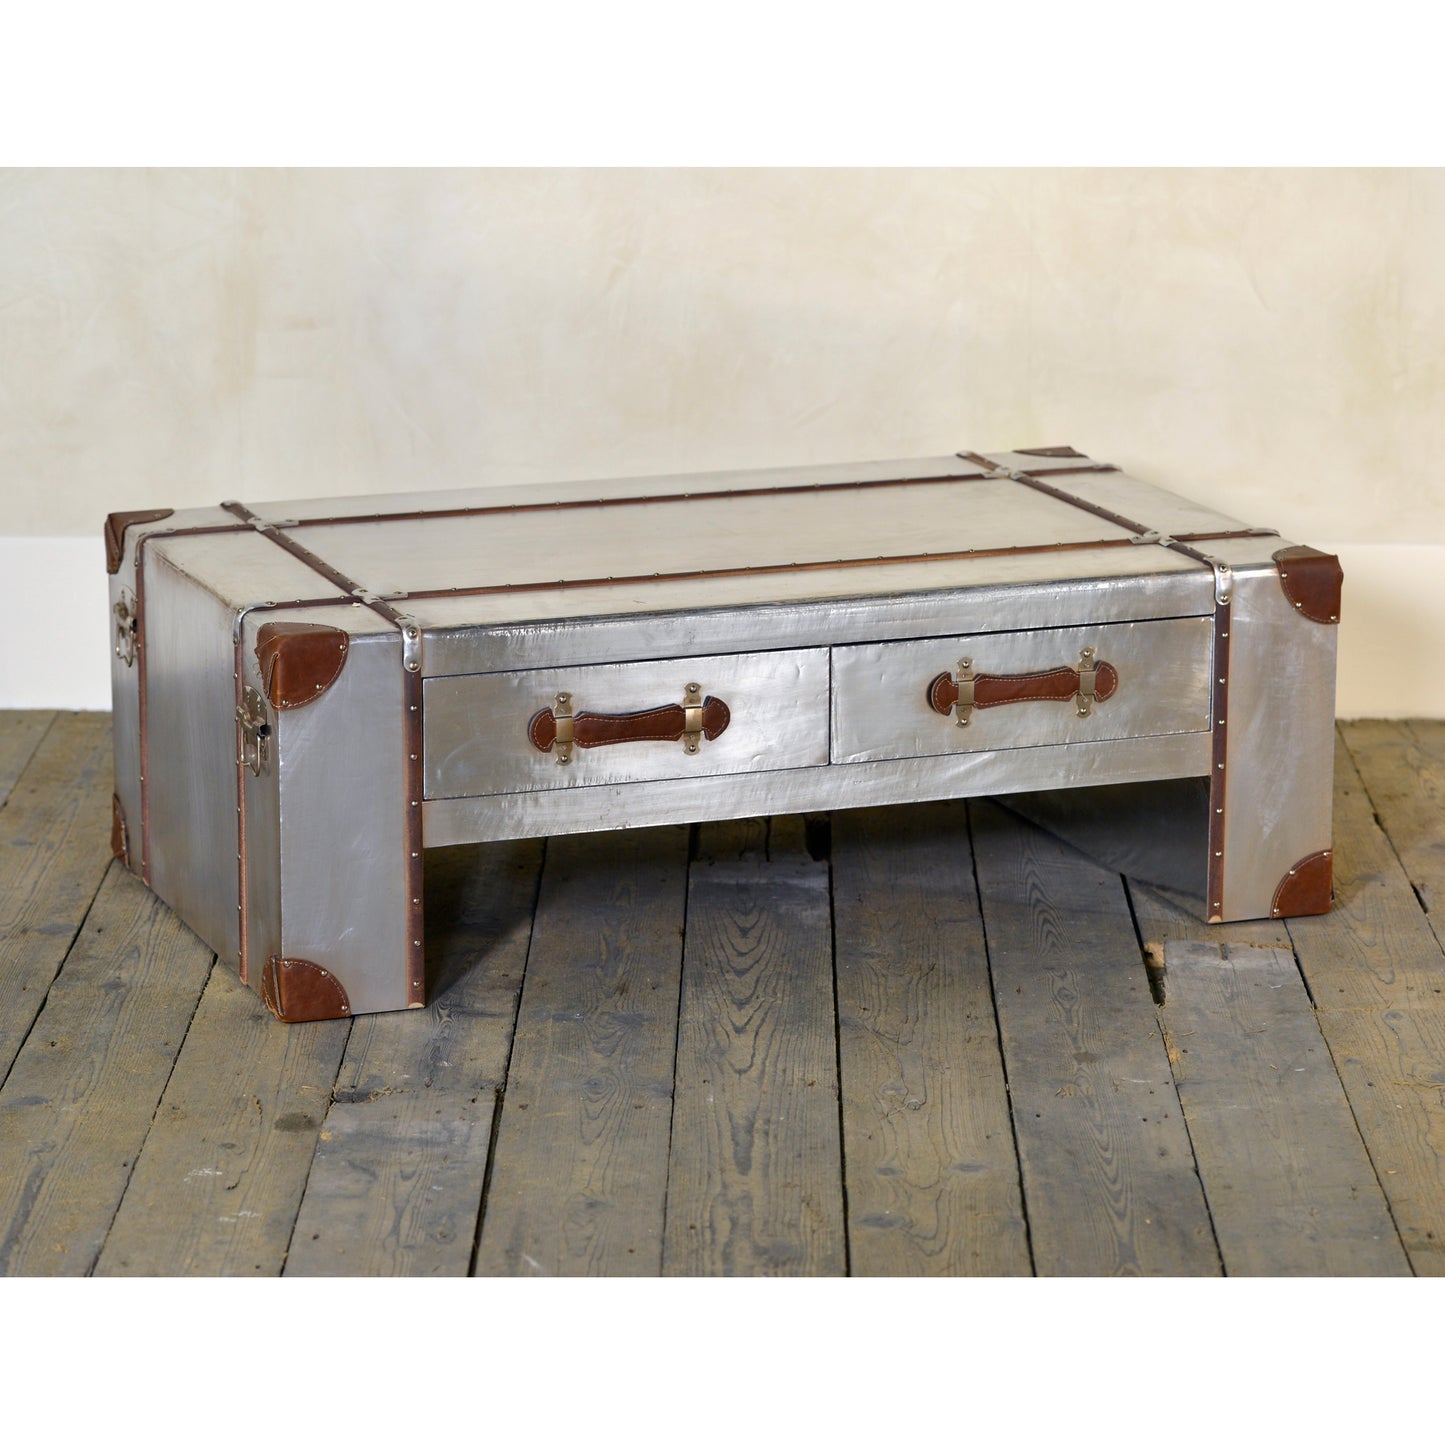 Industrial Aluminium Coffee Table with two drawers - Silver